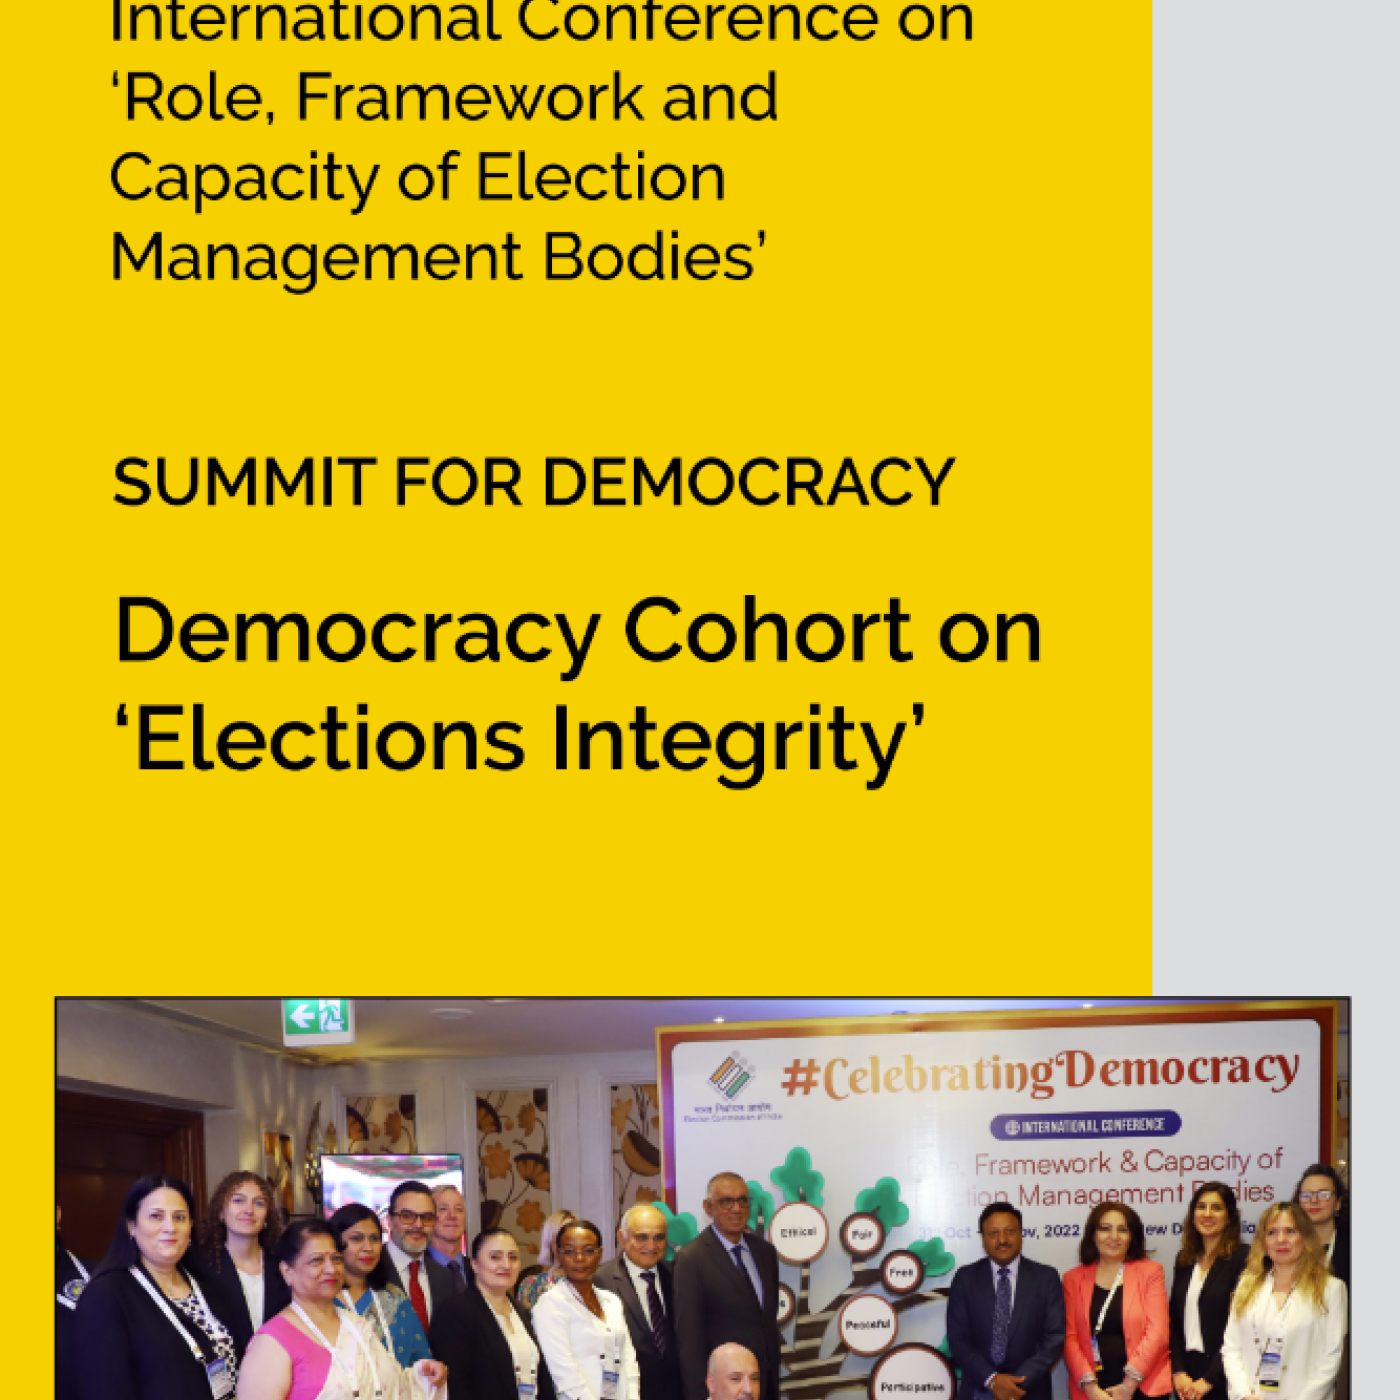 International Conference on ‘Role, Framework and Capacity of Election Management Bodies